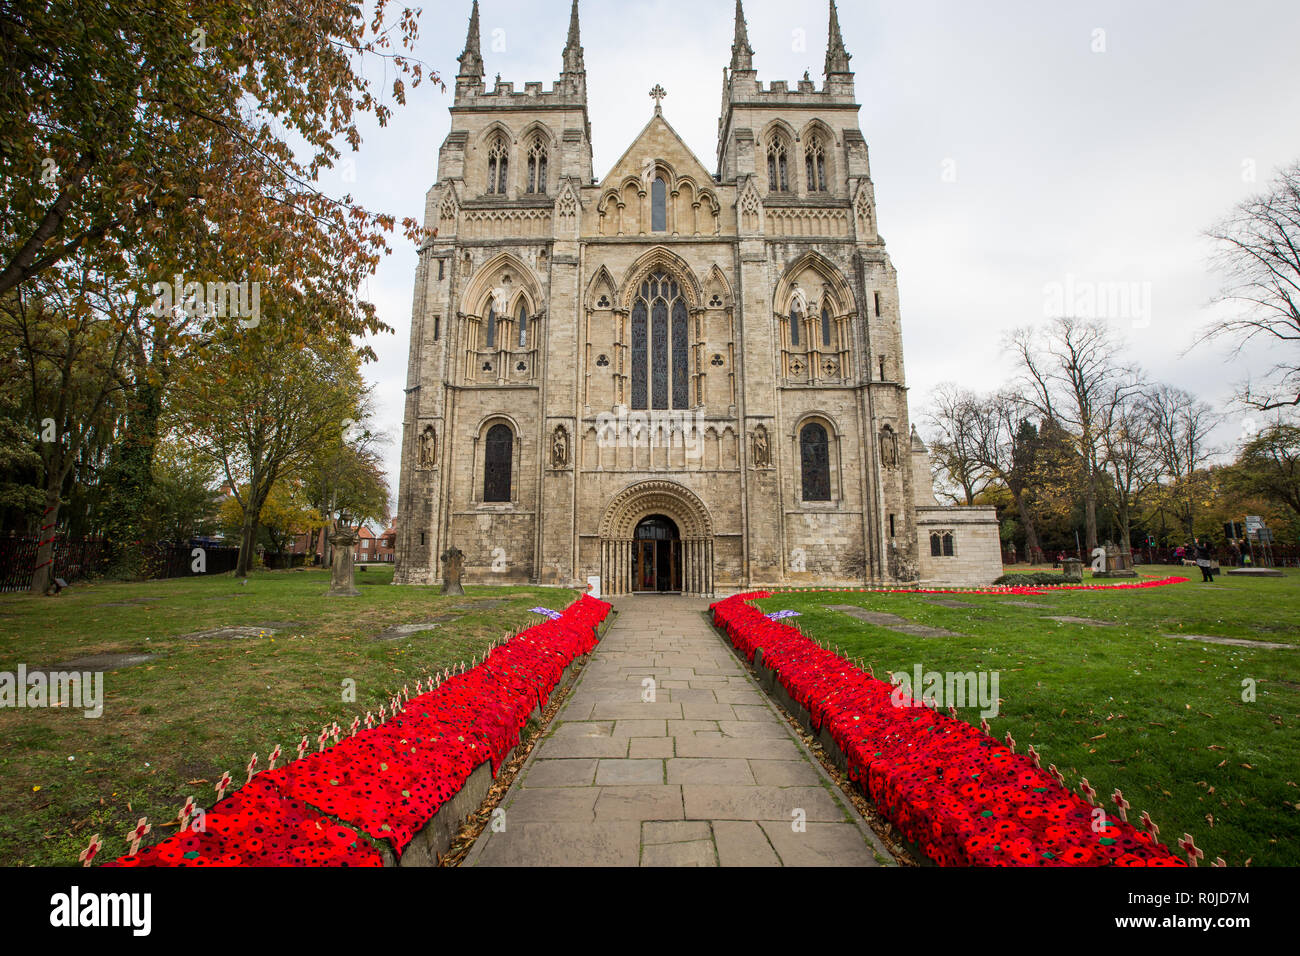 SELBY, NORTH YORKSHIRE, UK - NOVEMBER 4, 2018. The exterior of Selby Abbey decorated with a cascade of poppies to commemorate the centenary of WW1 Stock Photo